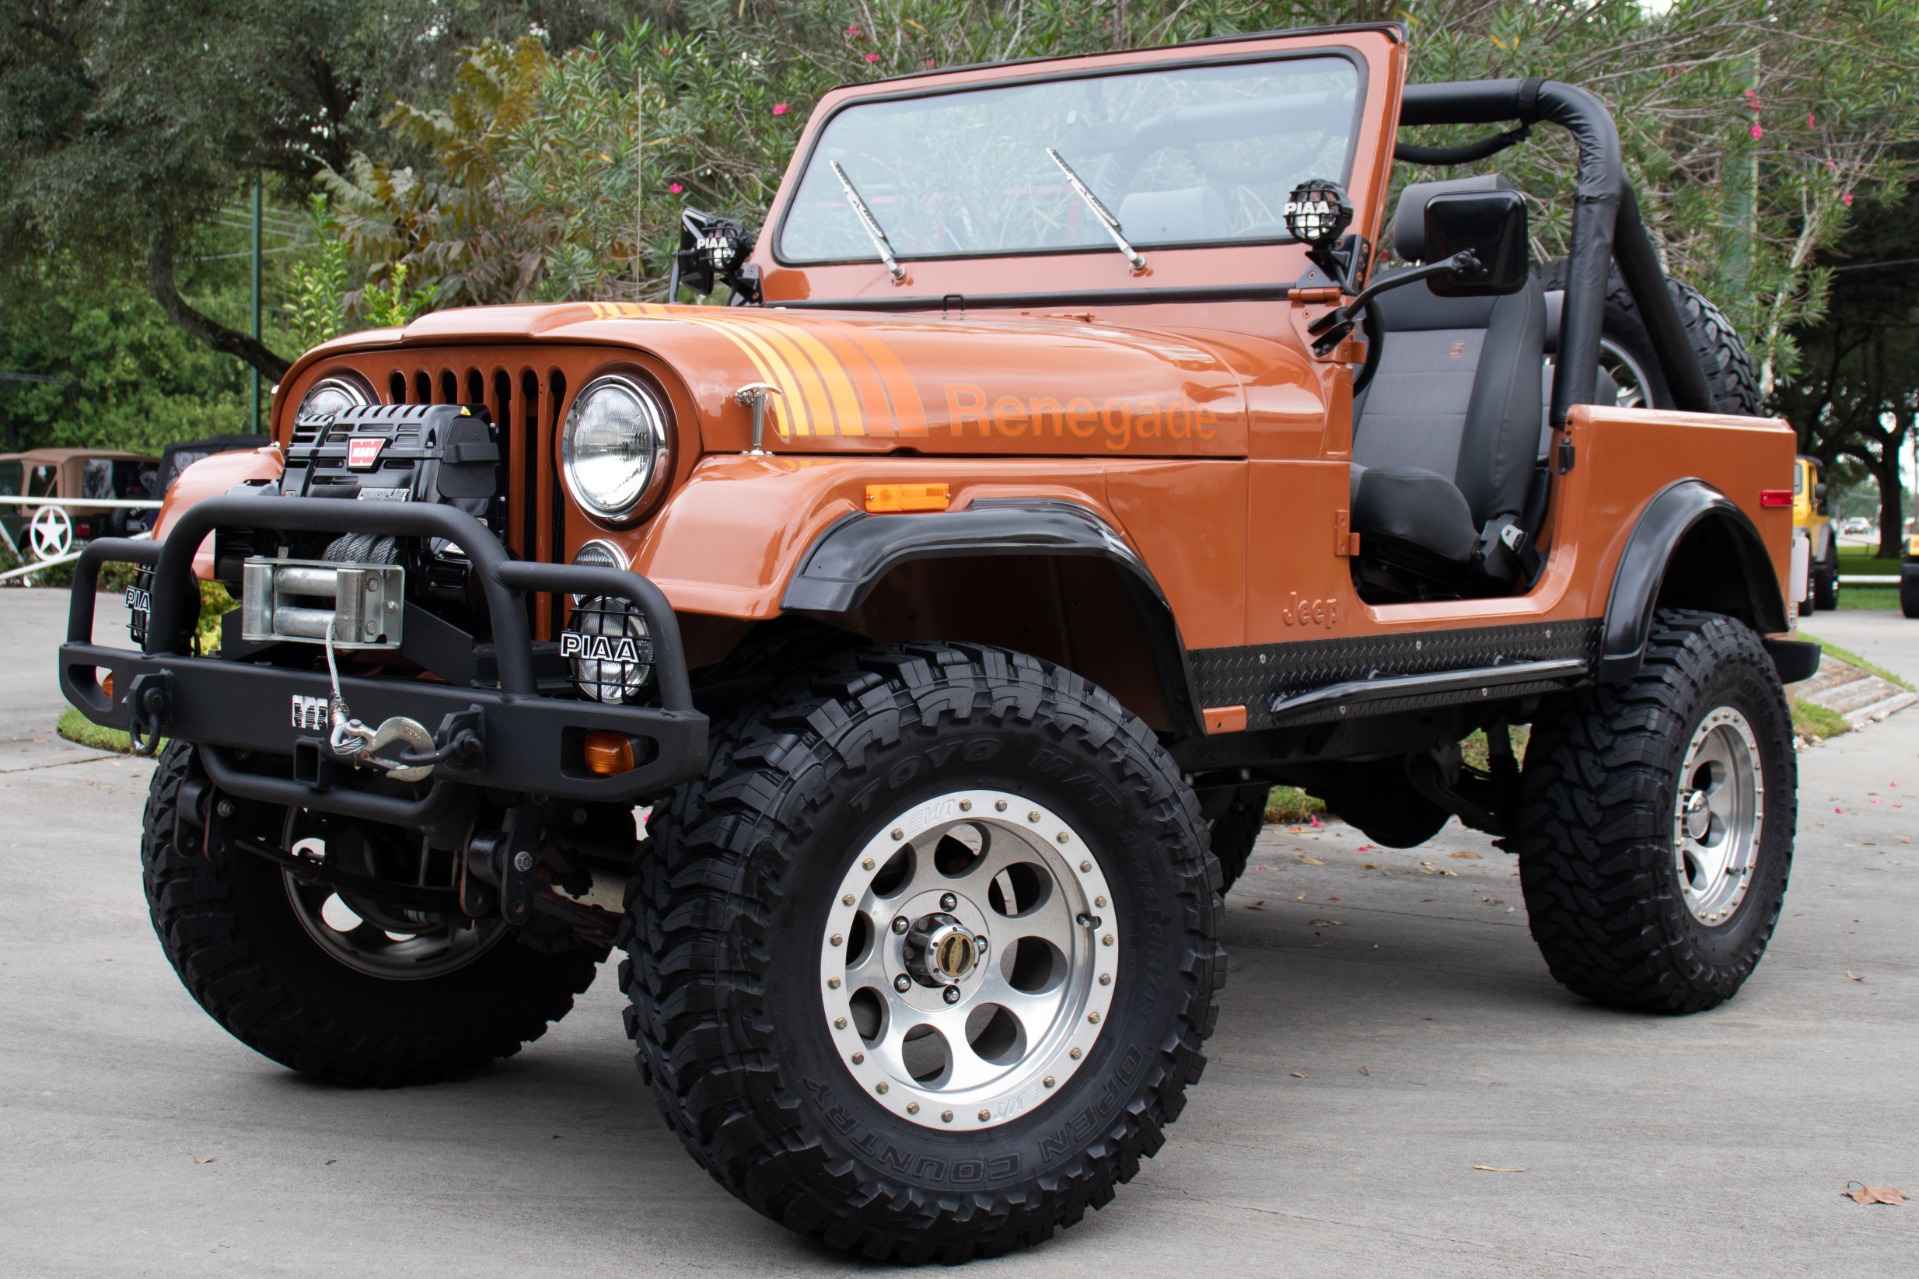 Used 1980 Jeep CJ-7 For Sale ($25,995) | Select Jeeps Inc. Stock #722736